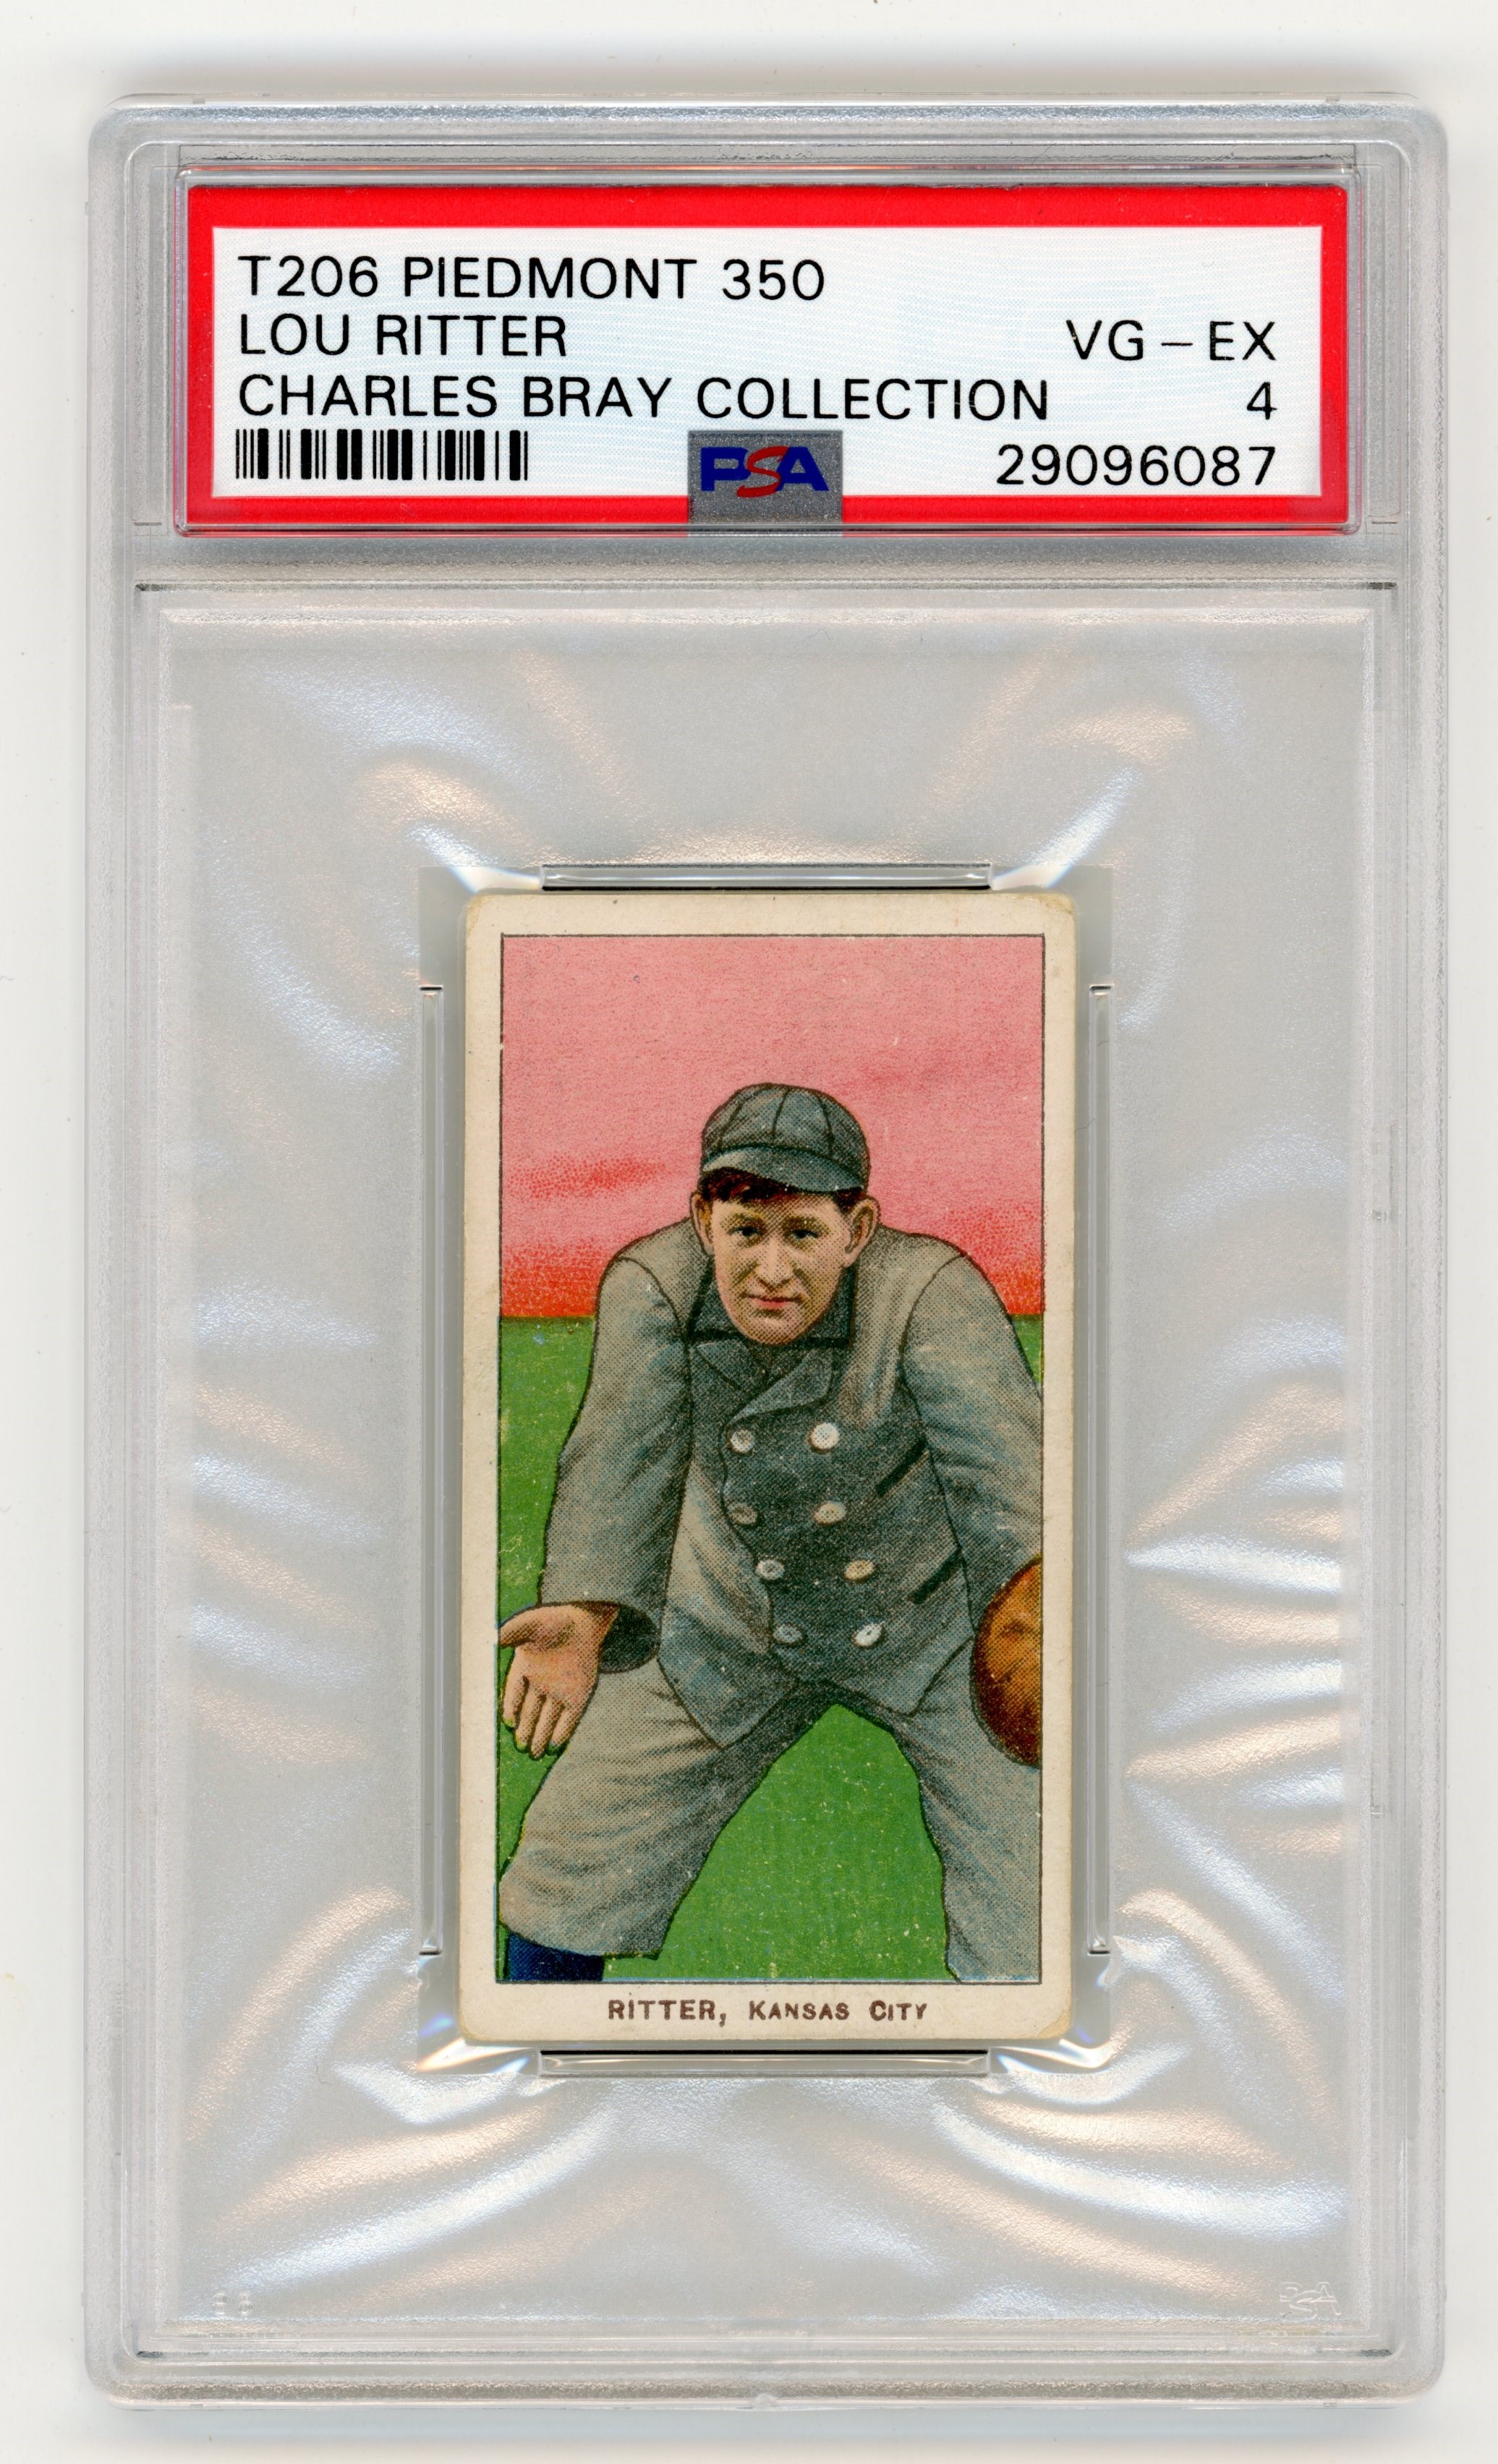 T206 Piedmont 350 Lou Ritter PSA VG-EX 4 From the Charles Bray Collection.